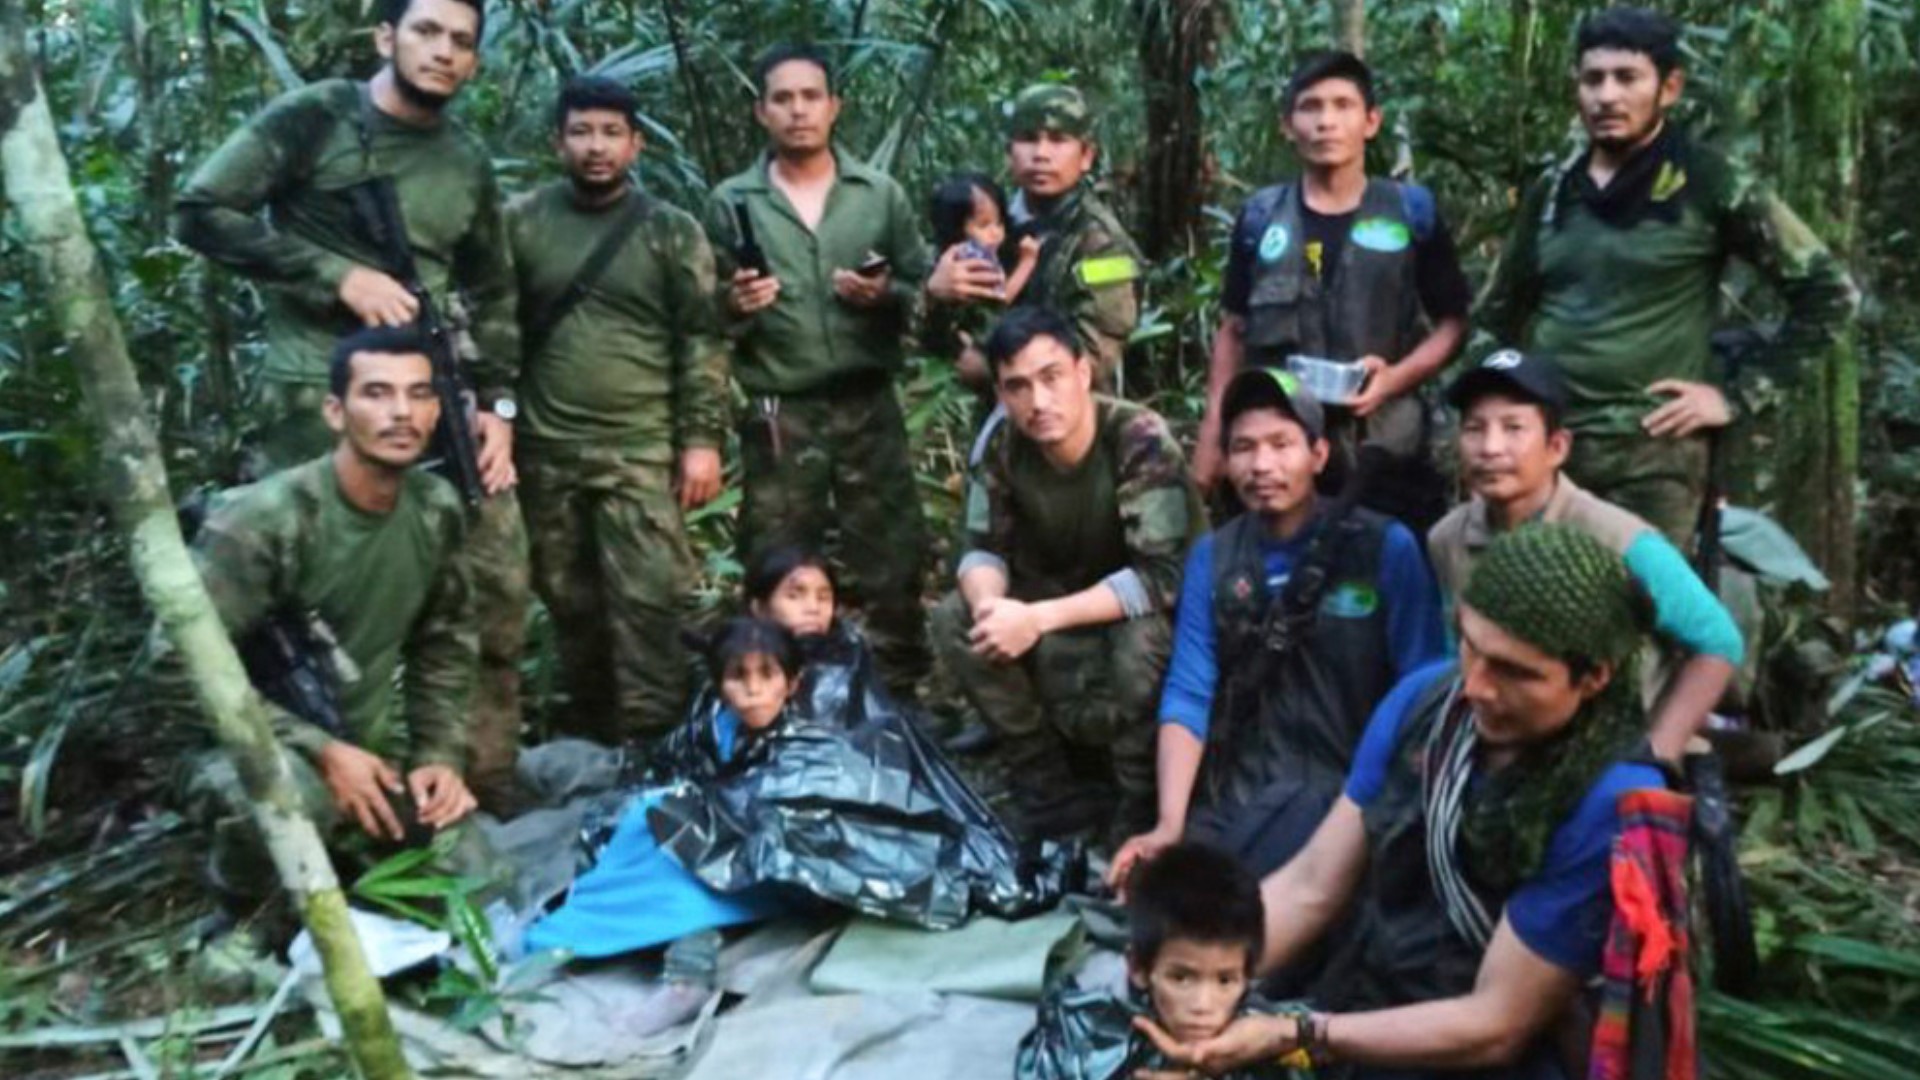 Authorities found four children who survived a small plane crash 40 days ago and had been the subject of an intense search in the Amazon jungle.